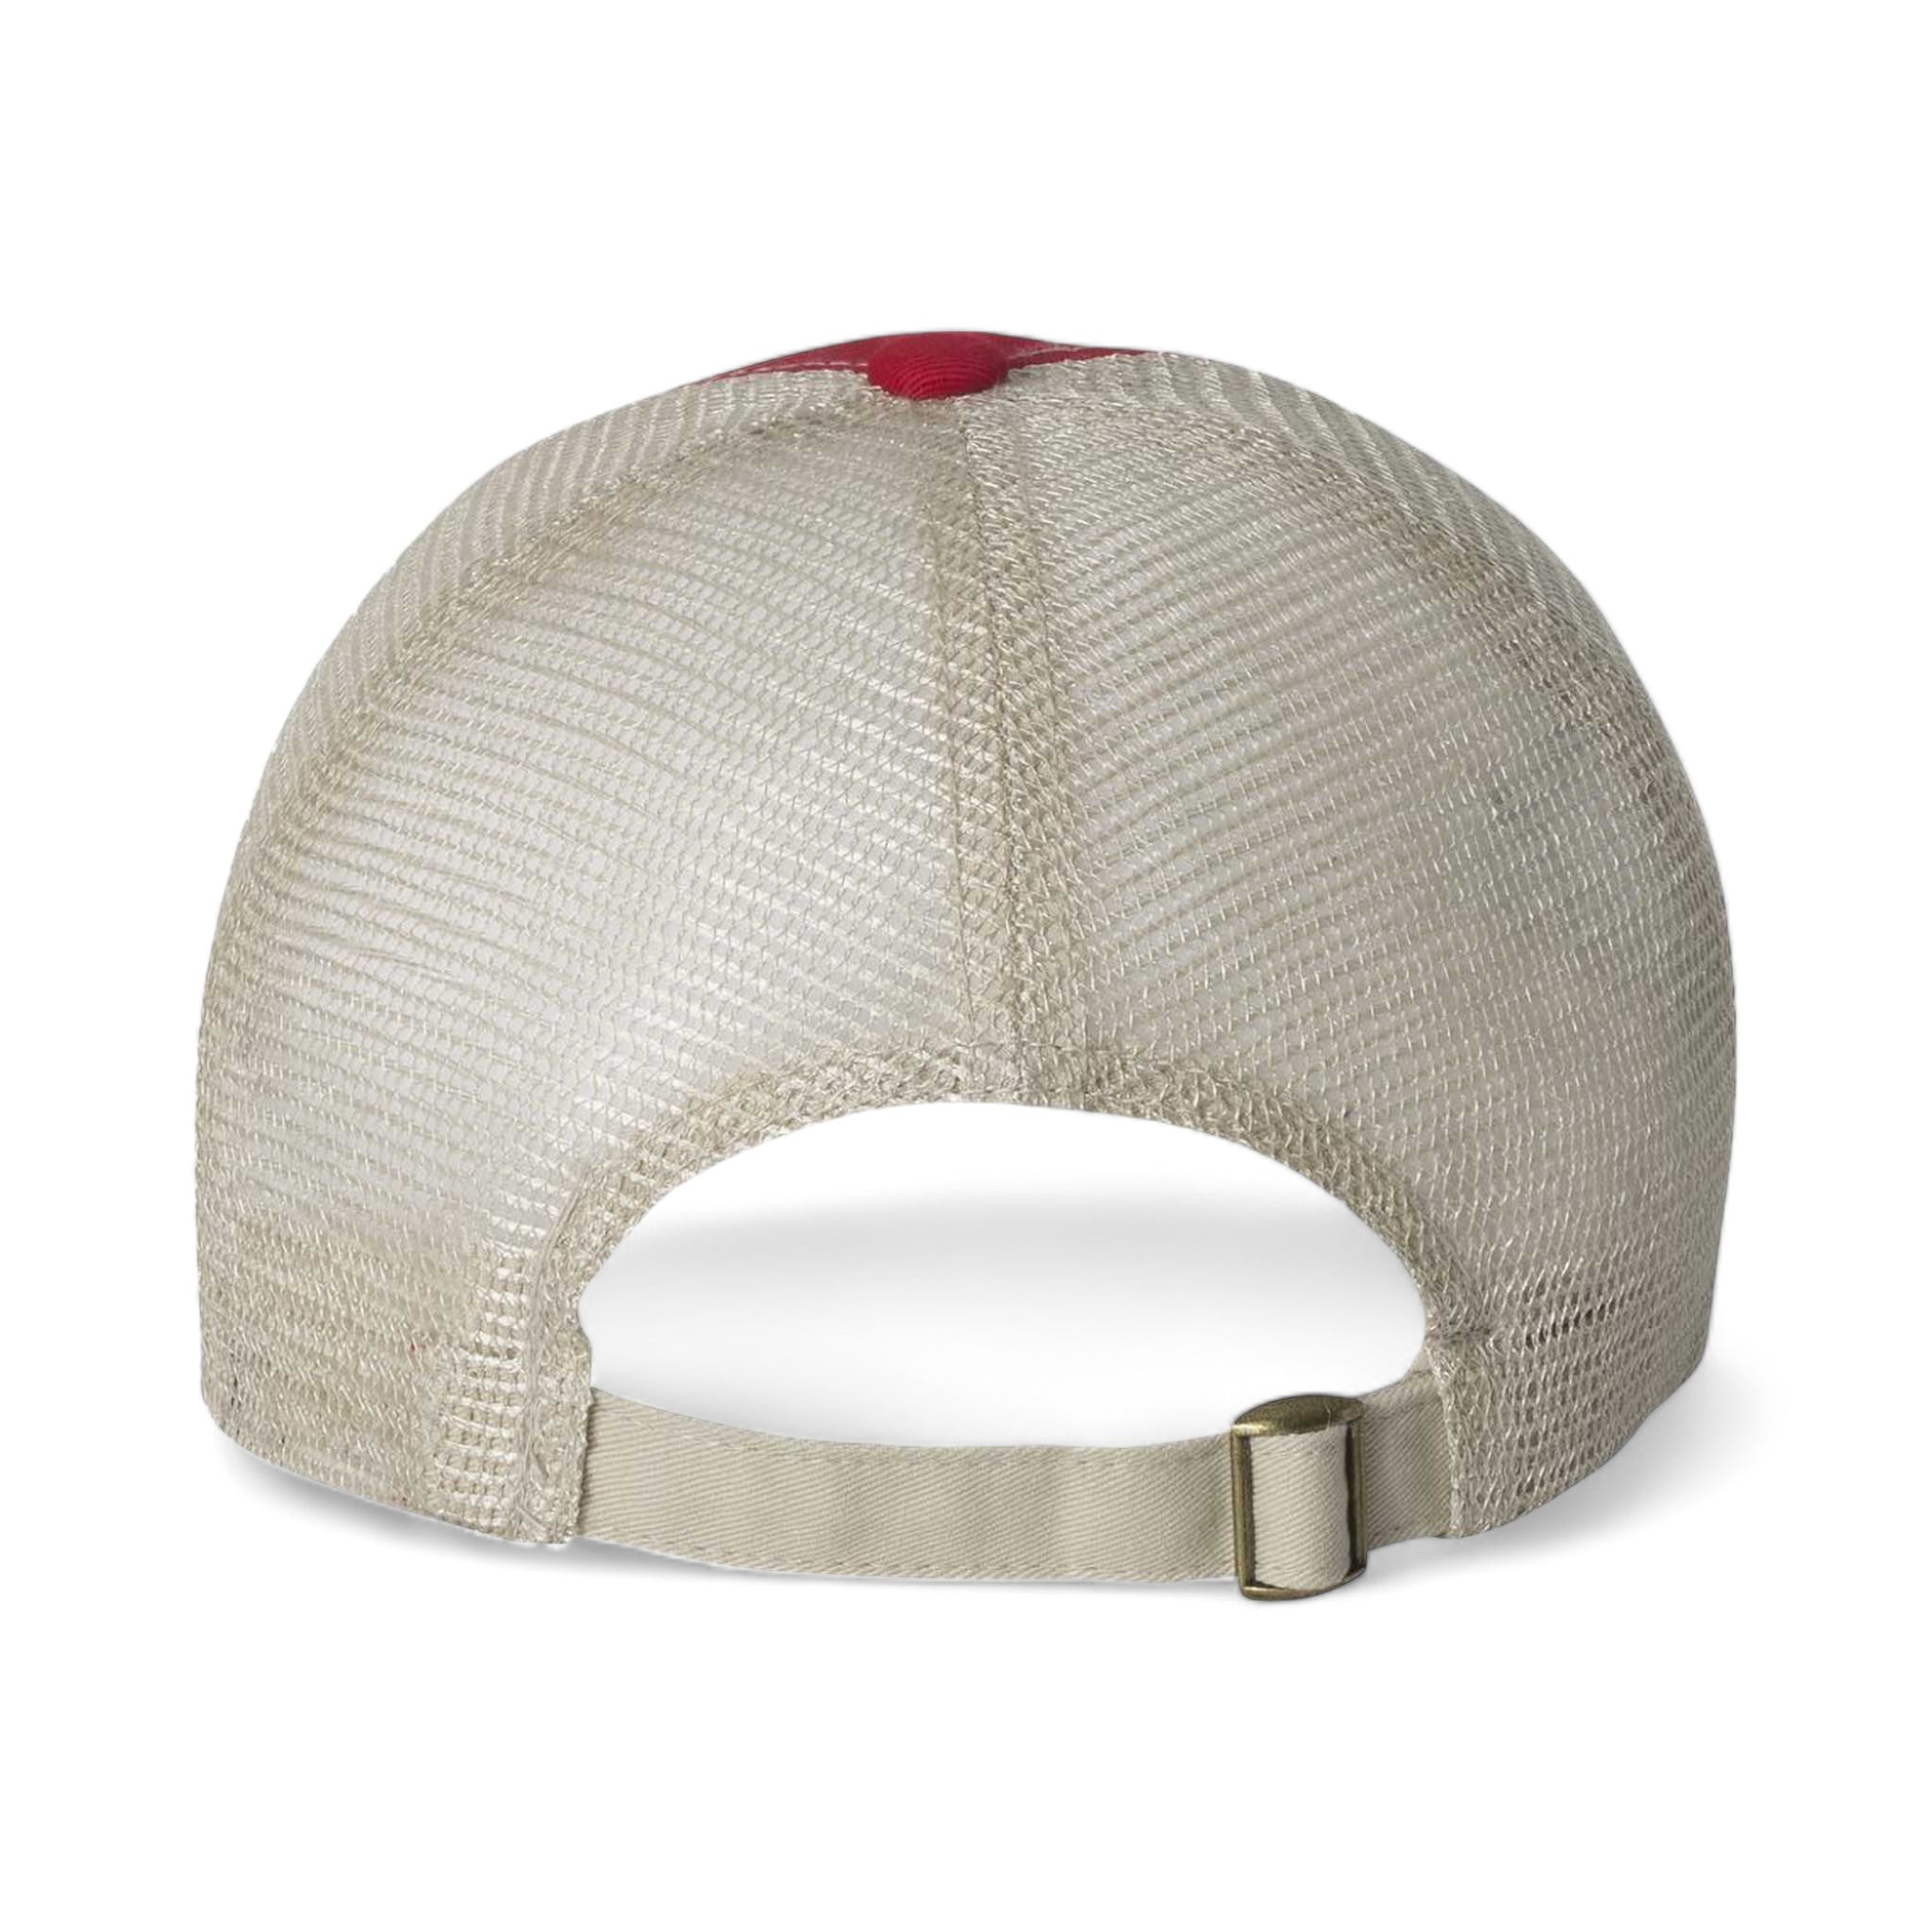 Back view of Sportsman 3100 custom hat in red and stone